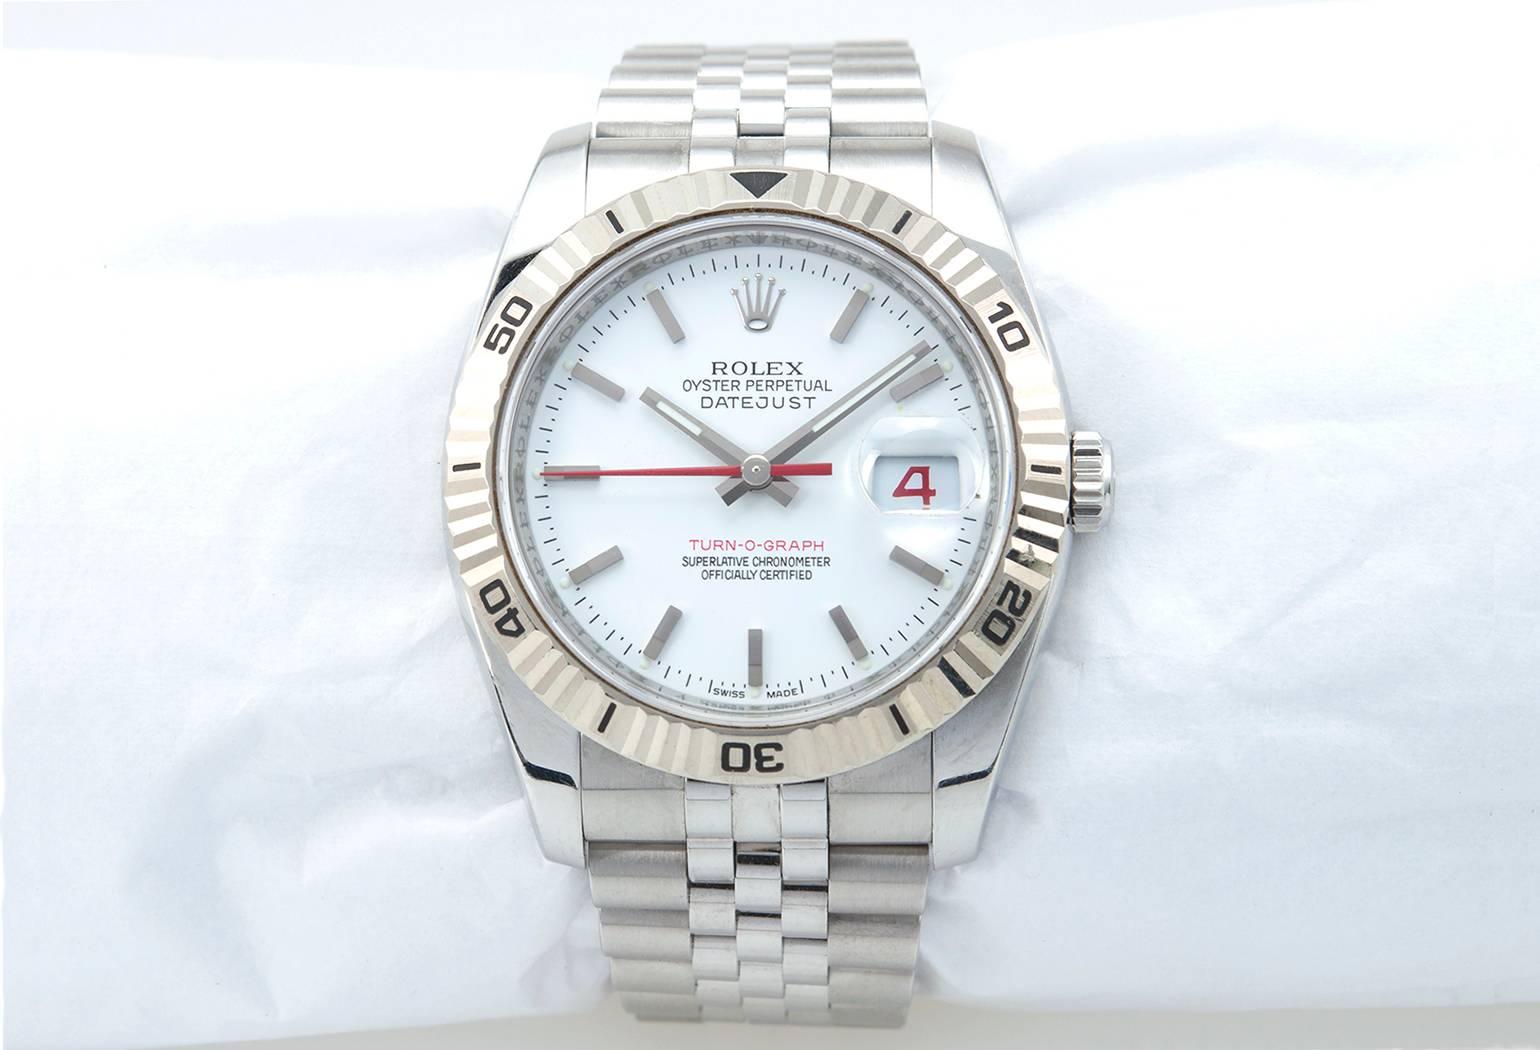 Rolex Stainless Steel DateJust Turn-O-Graph White Gold Bezel In Excellent Condition For Sale In Los Angeles, CA